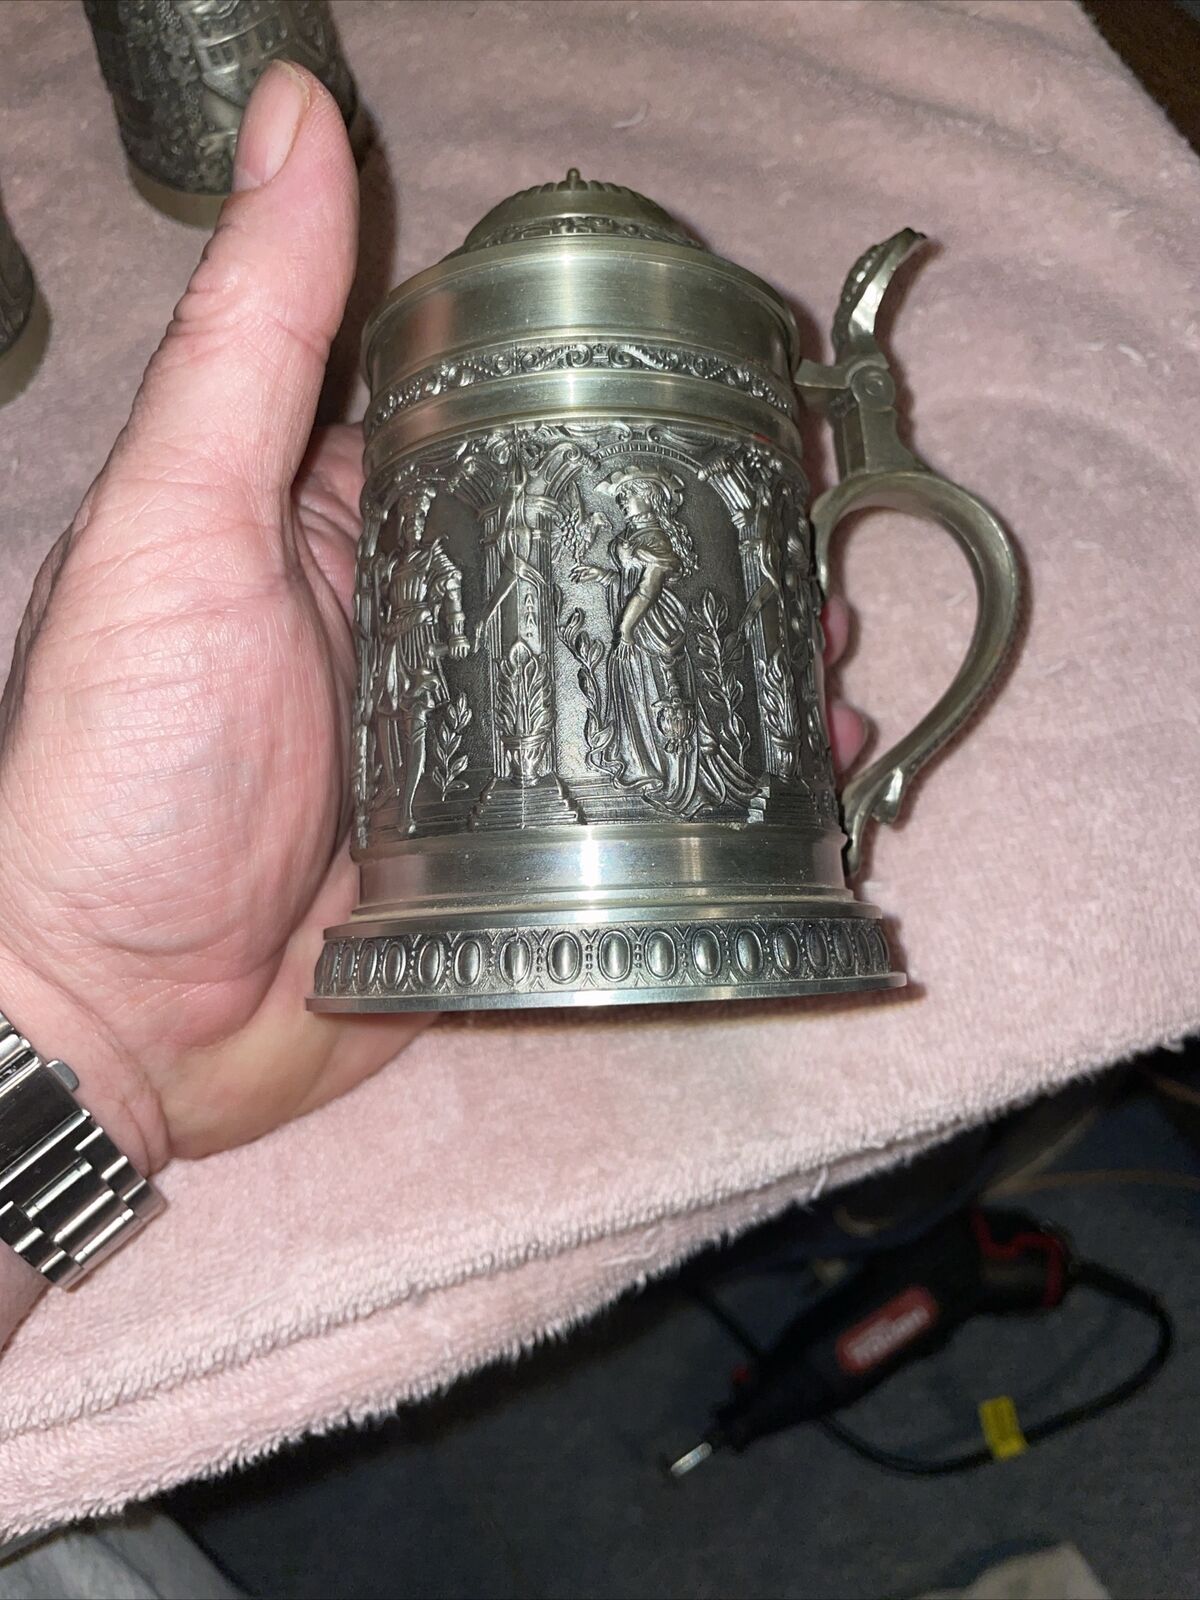 SKS Zinn95% West Germany Made Pewter Tankard Courting Girl